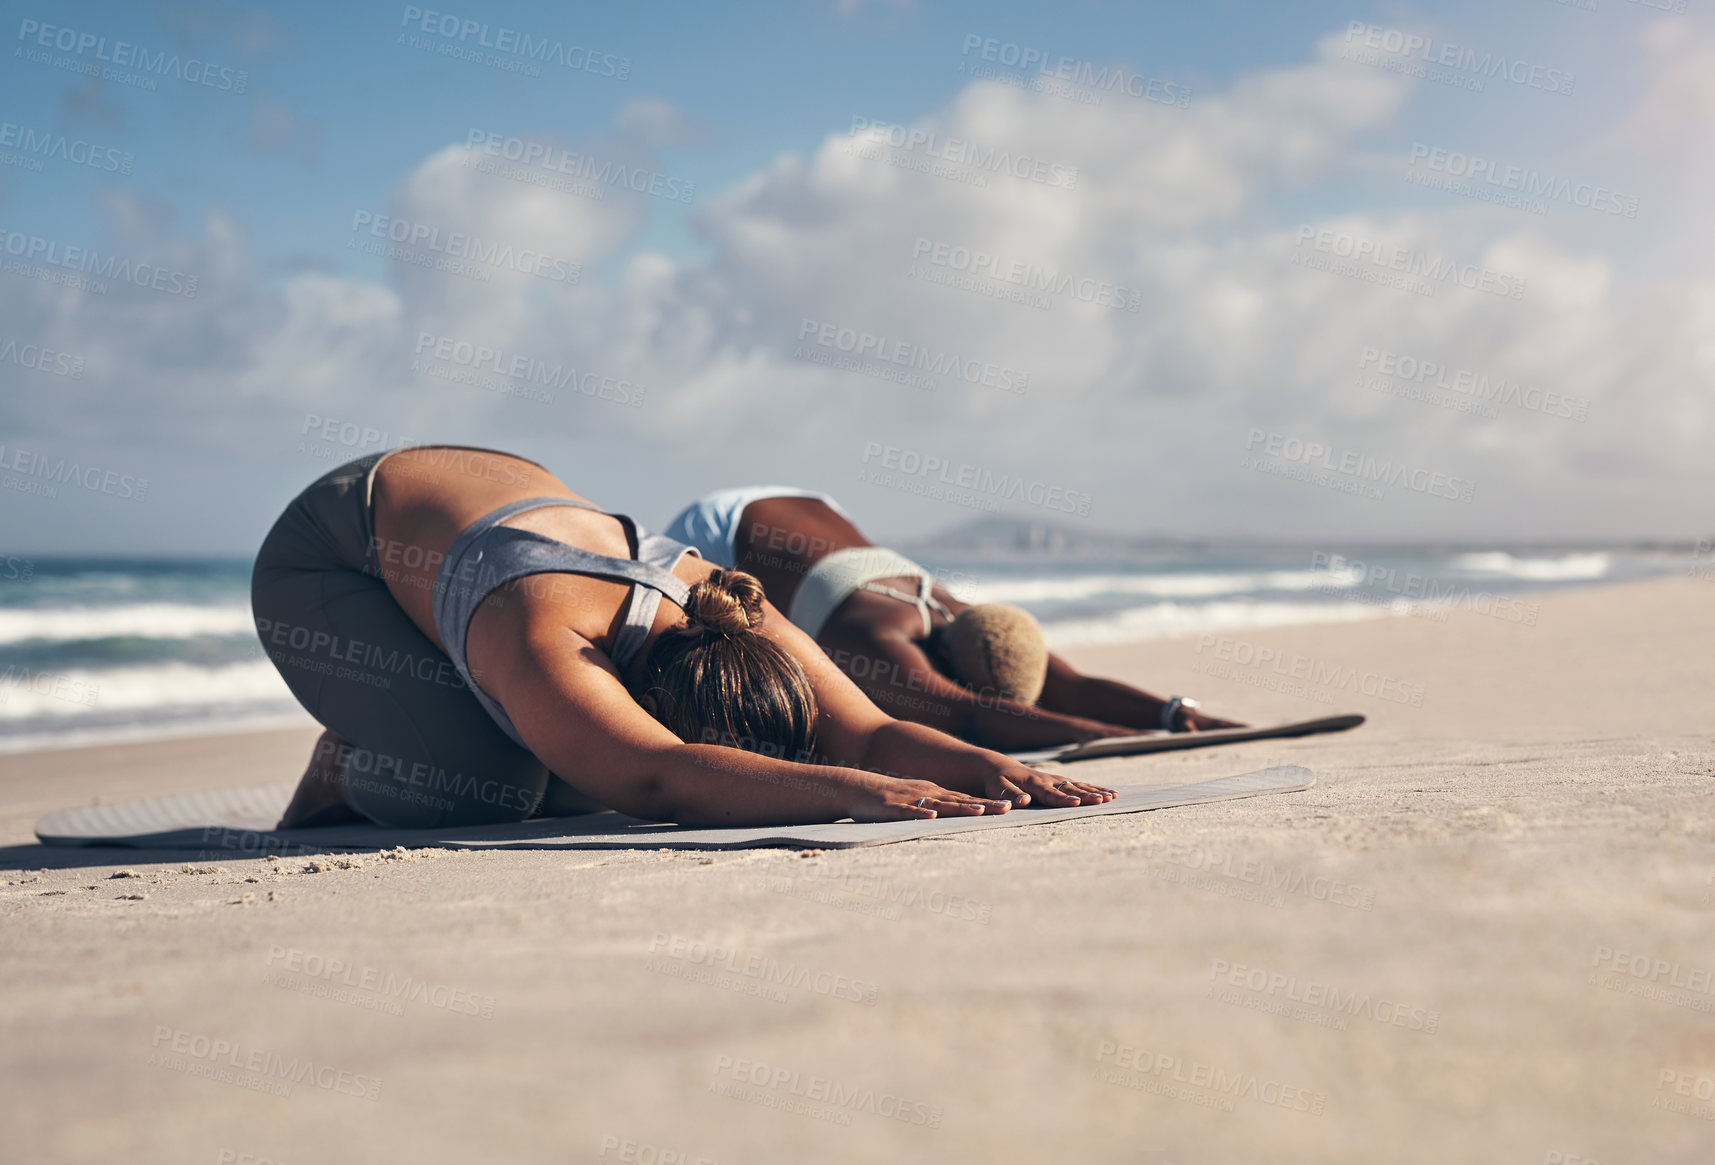 Buy stock photo Shot of two young women practicing yoga on the beach